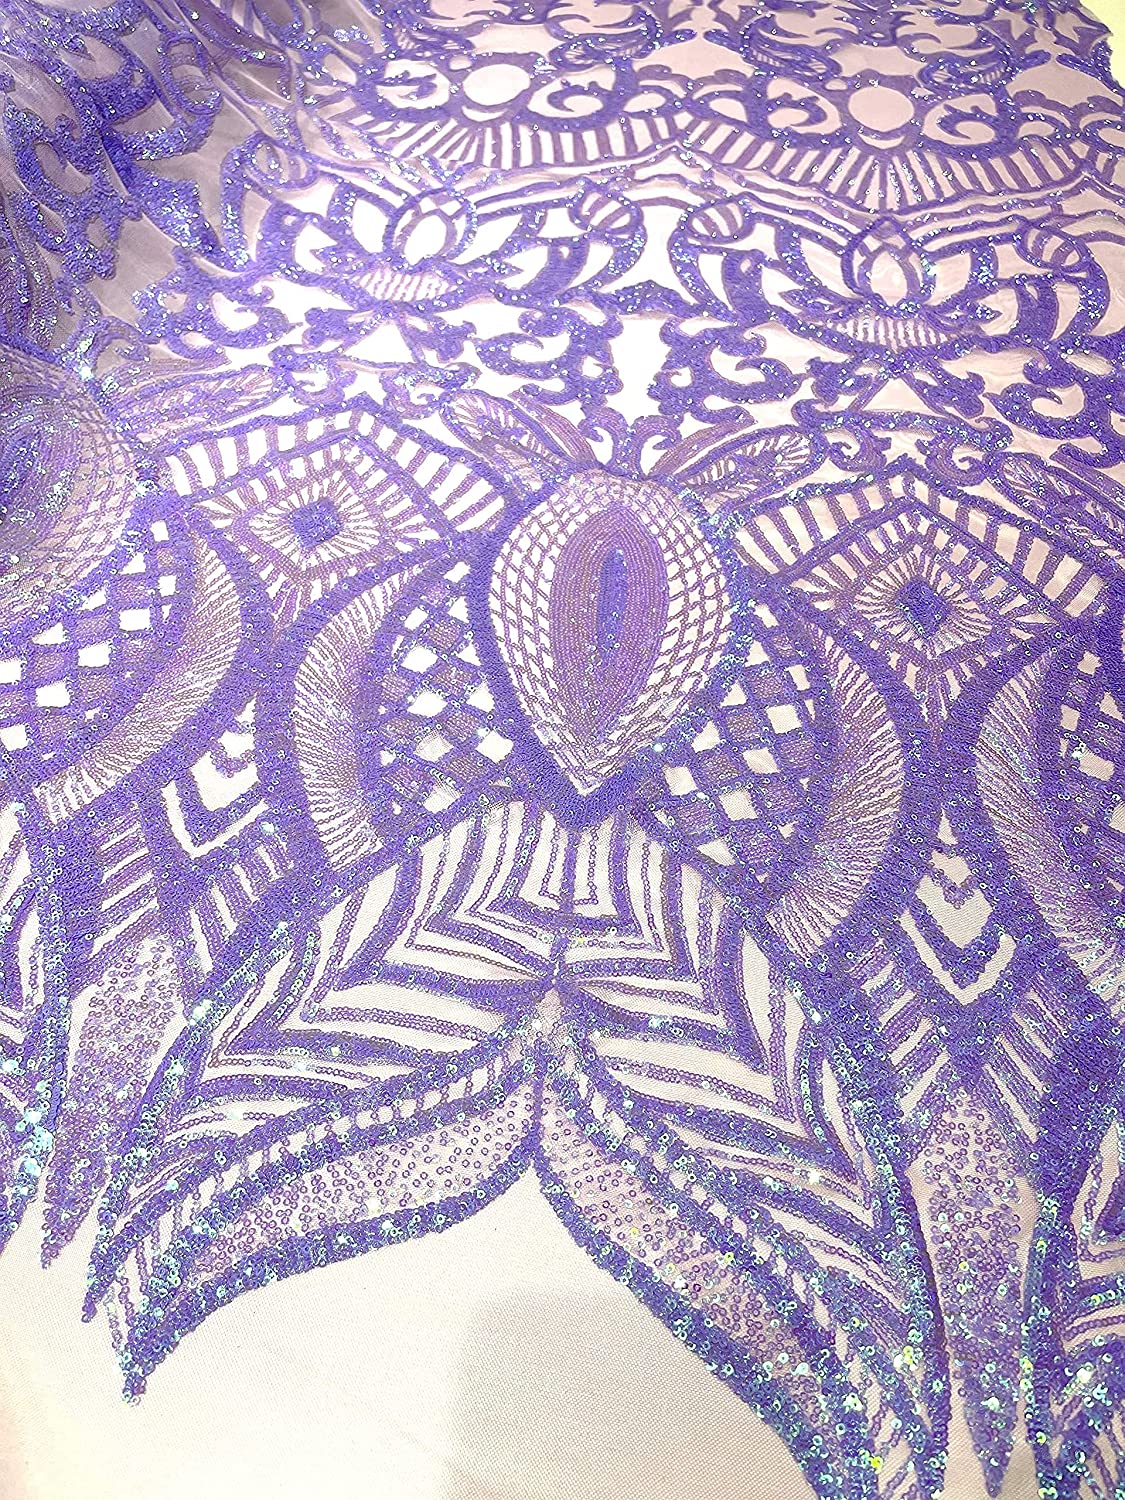 Iridescent Royalty Design On A 4 Way Stretch Mesh/Prom Fabric (1 Yard, Lilac Iridescent on Lilac Mesh)